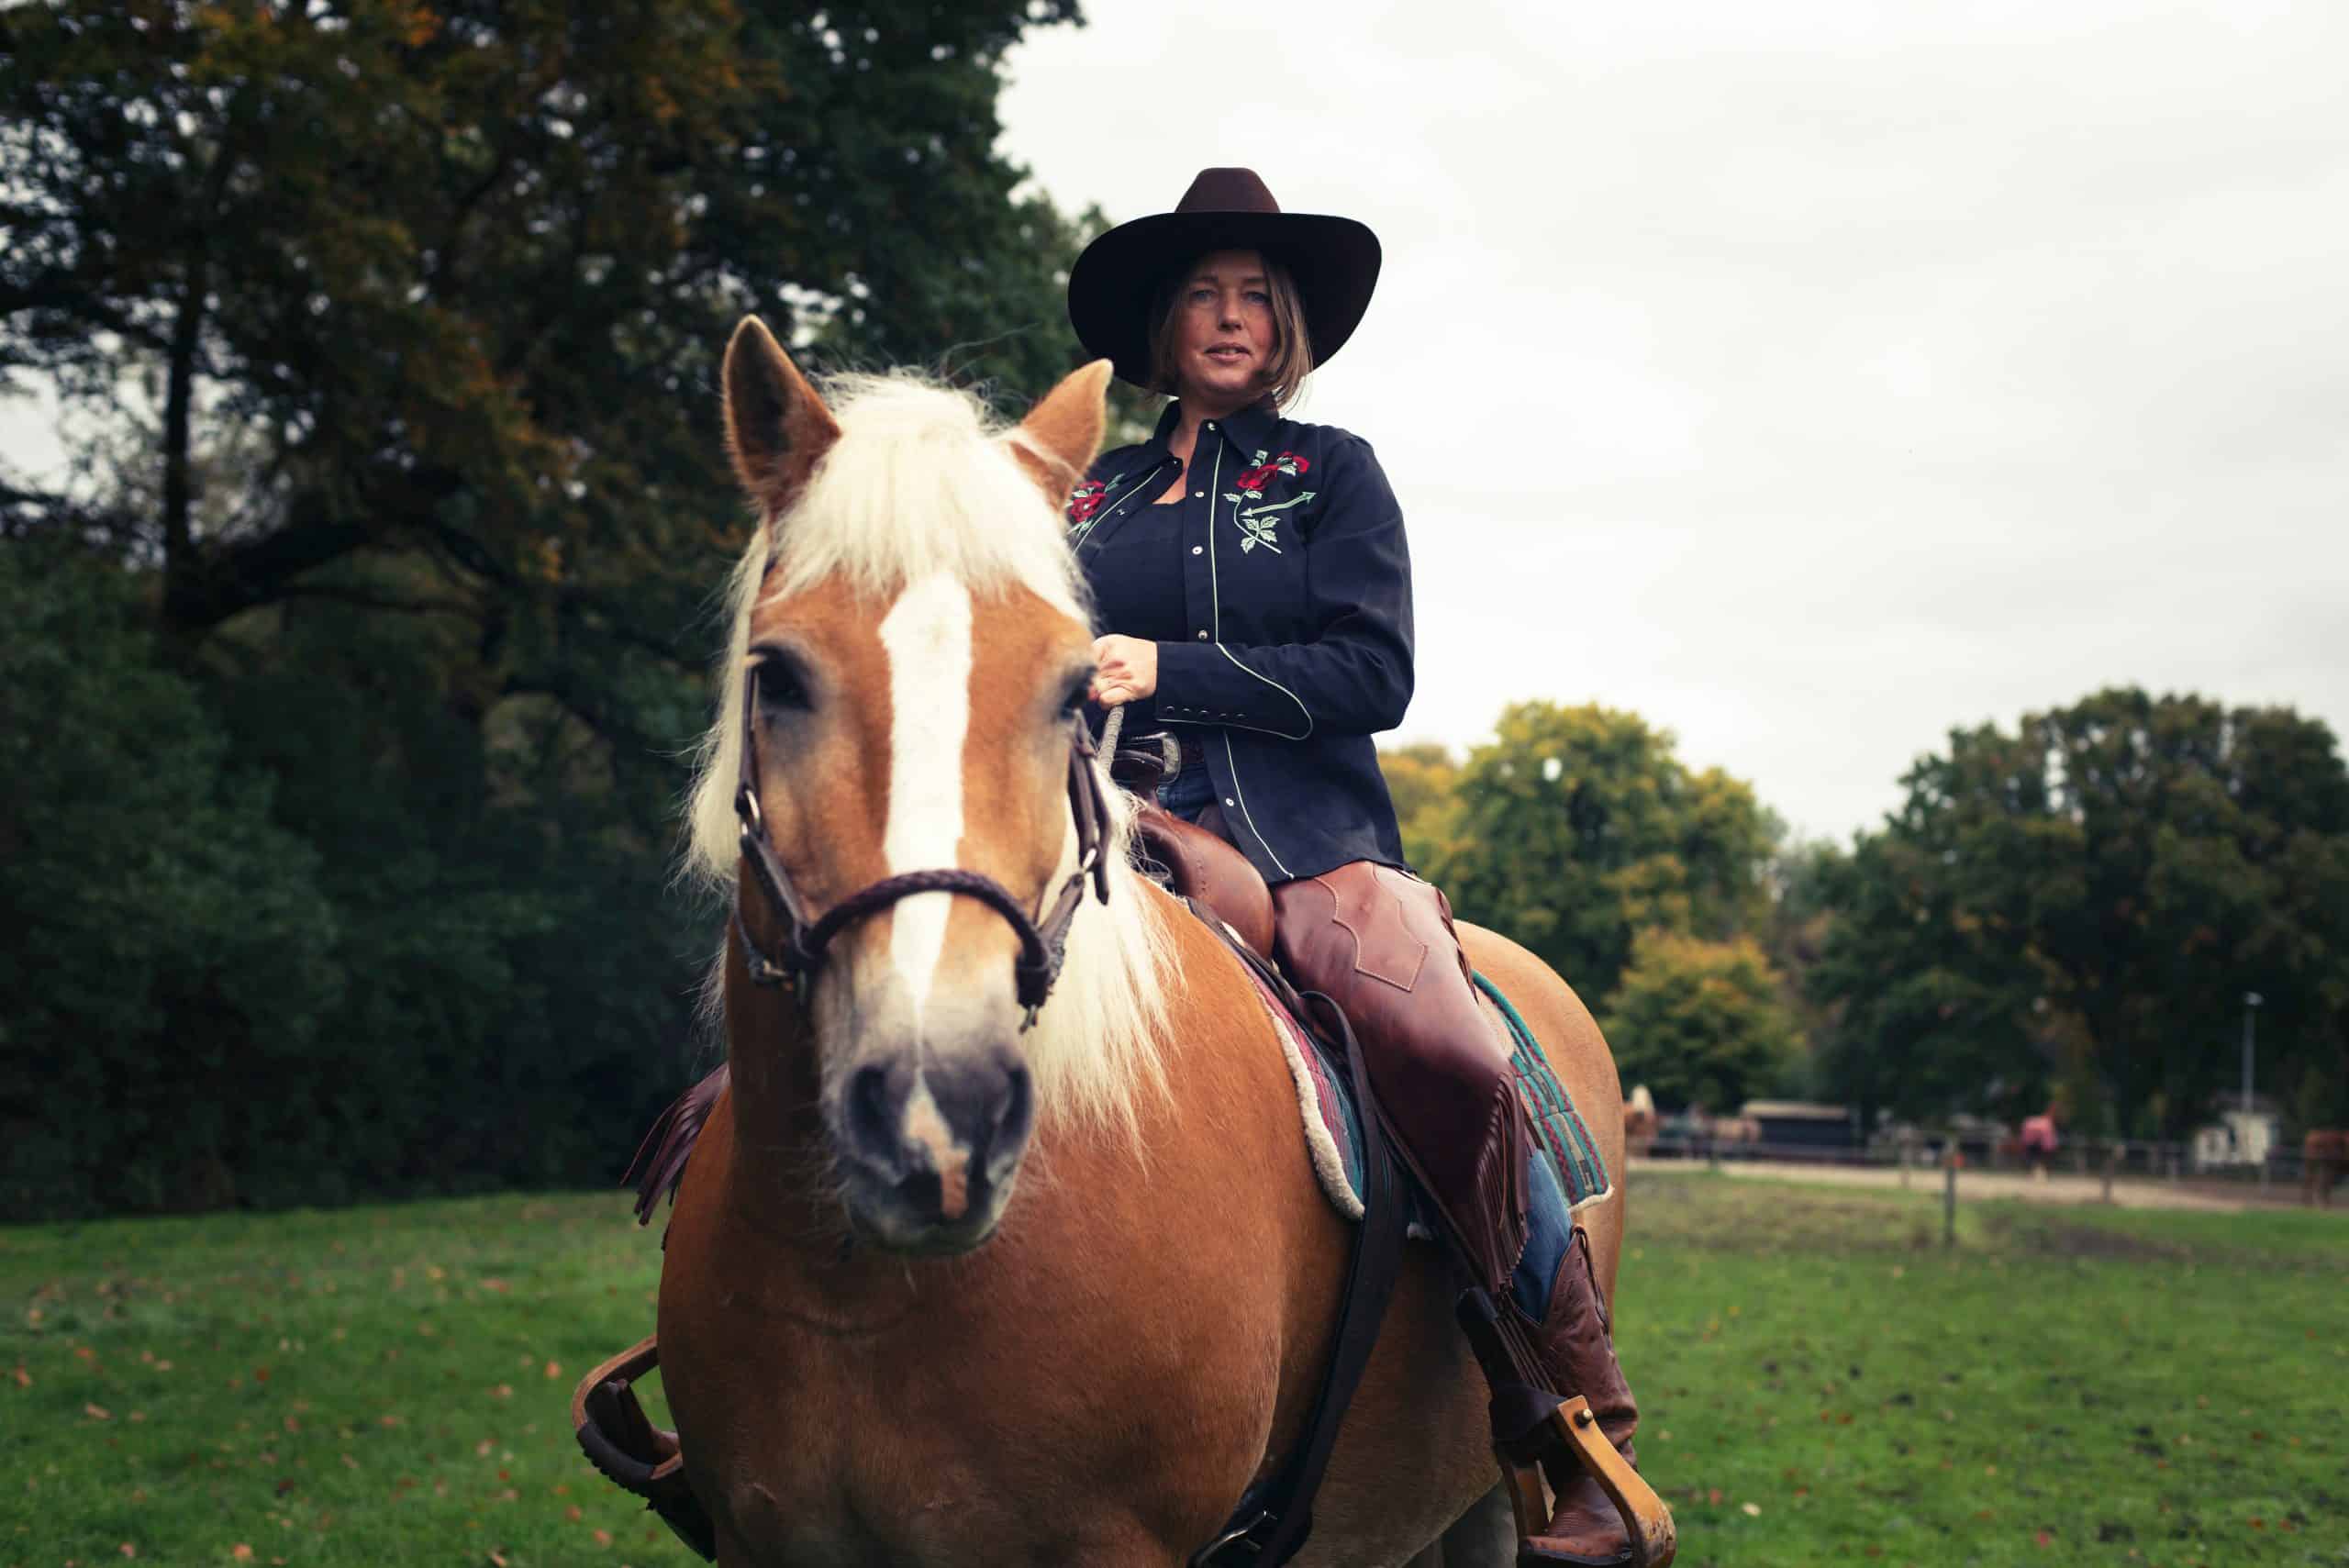 Smiling western style woman horse riding in countryside. trust